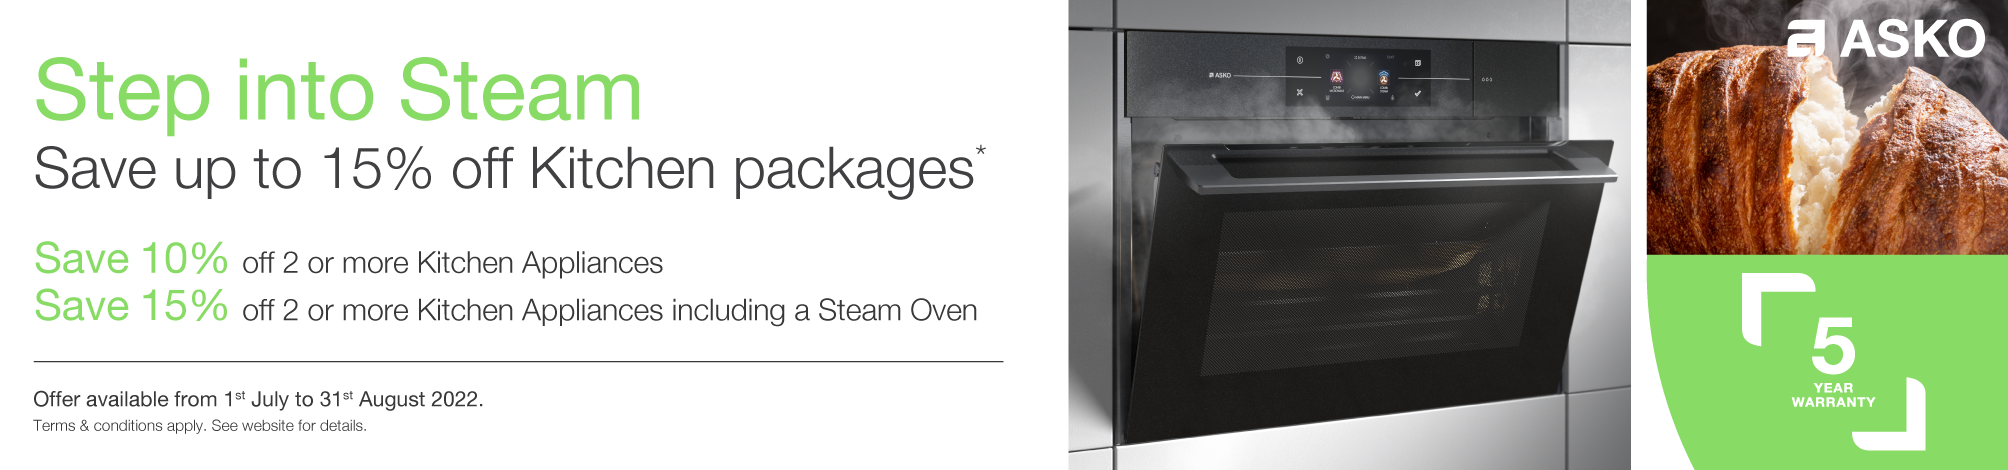 Step into Steam! Save up to 15% off Asko Kitchen packages